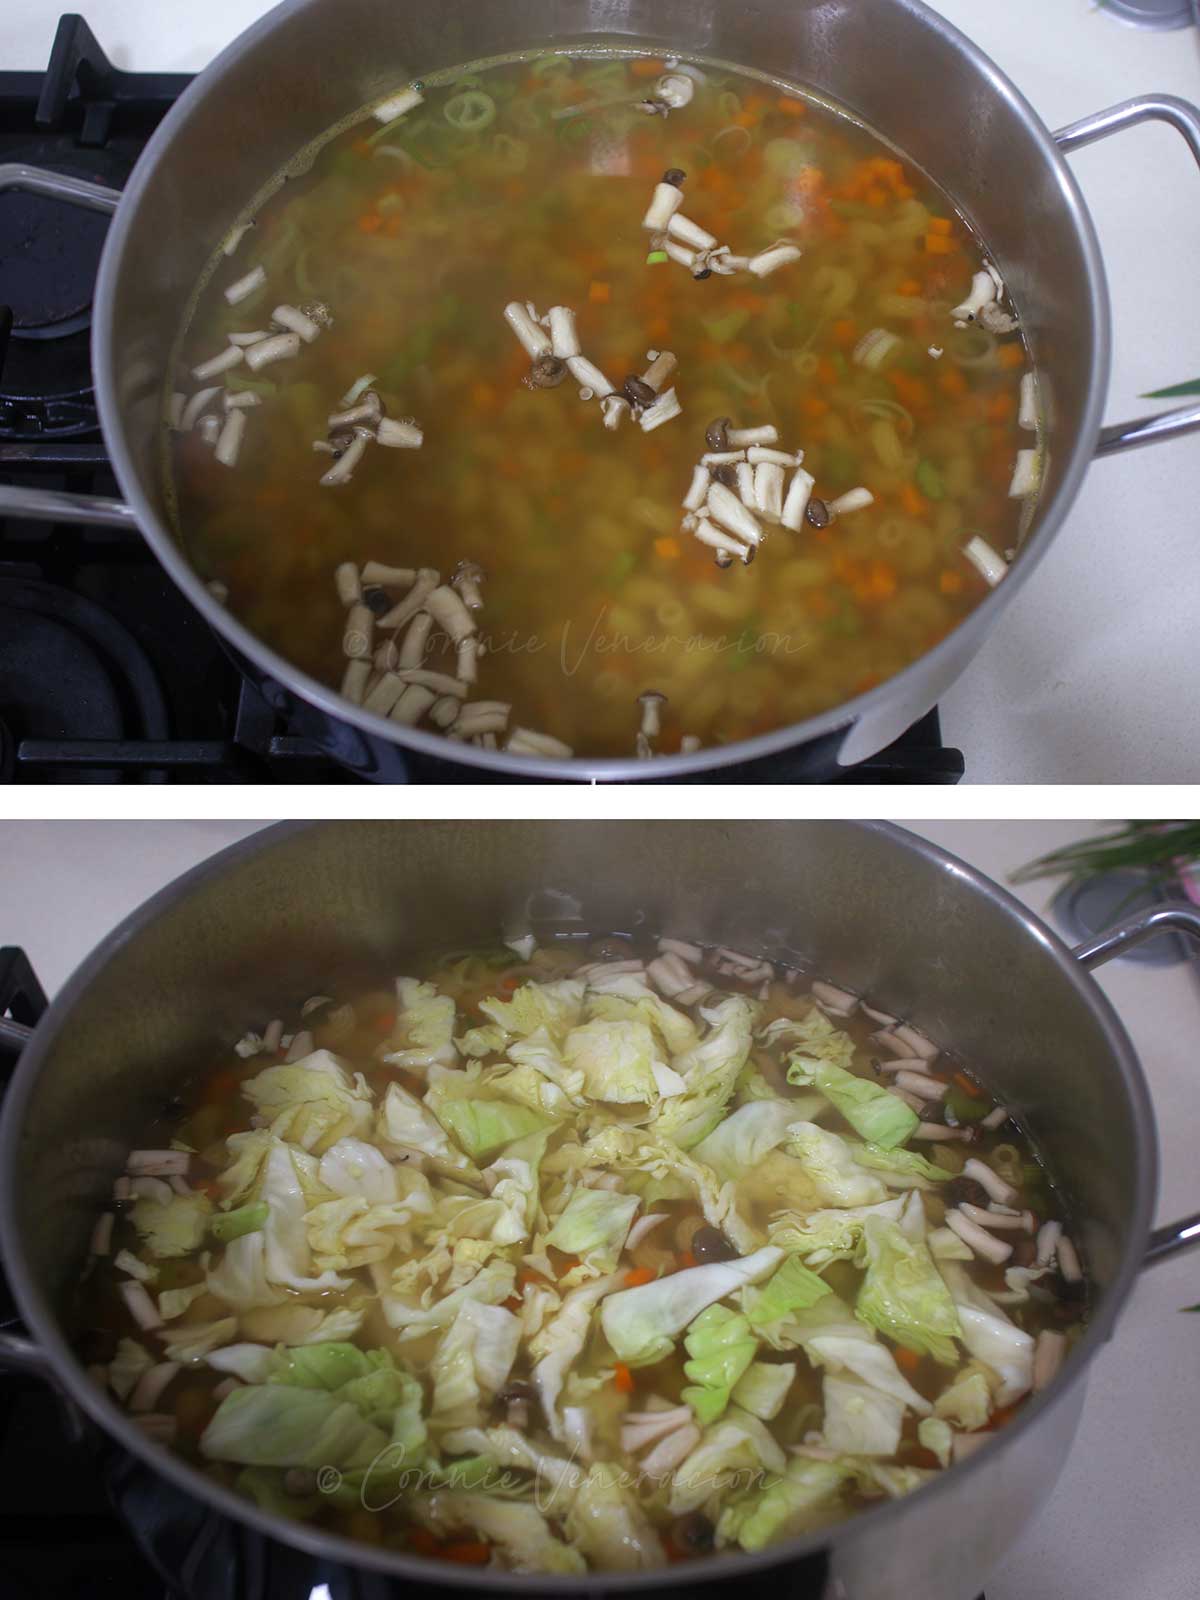 Adding mushrooms and cabbage to chicken and macaroni soup (Filipino sopas)